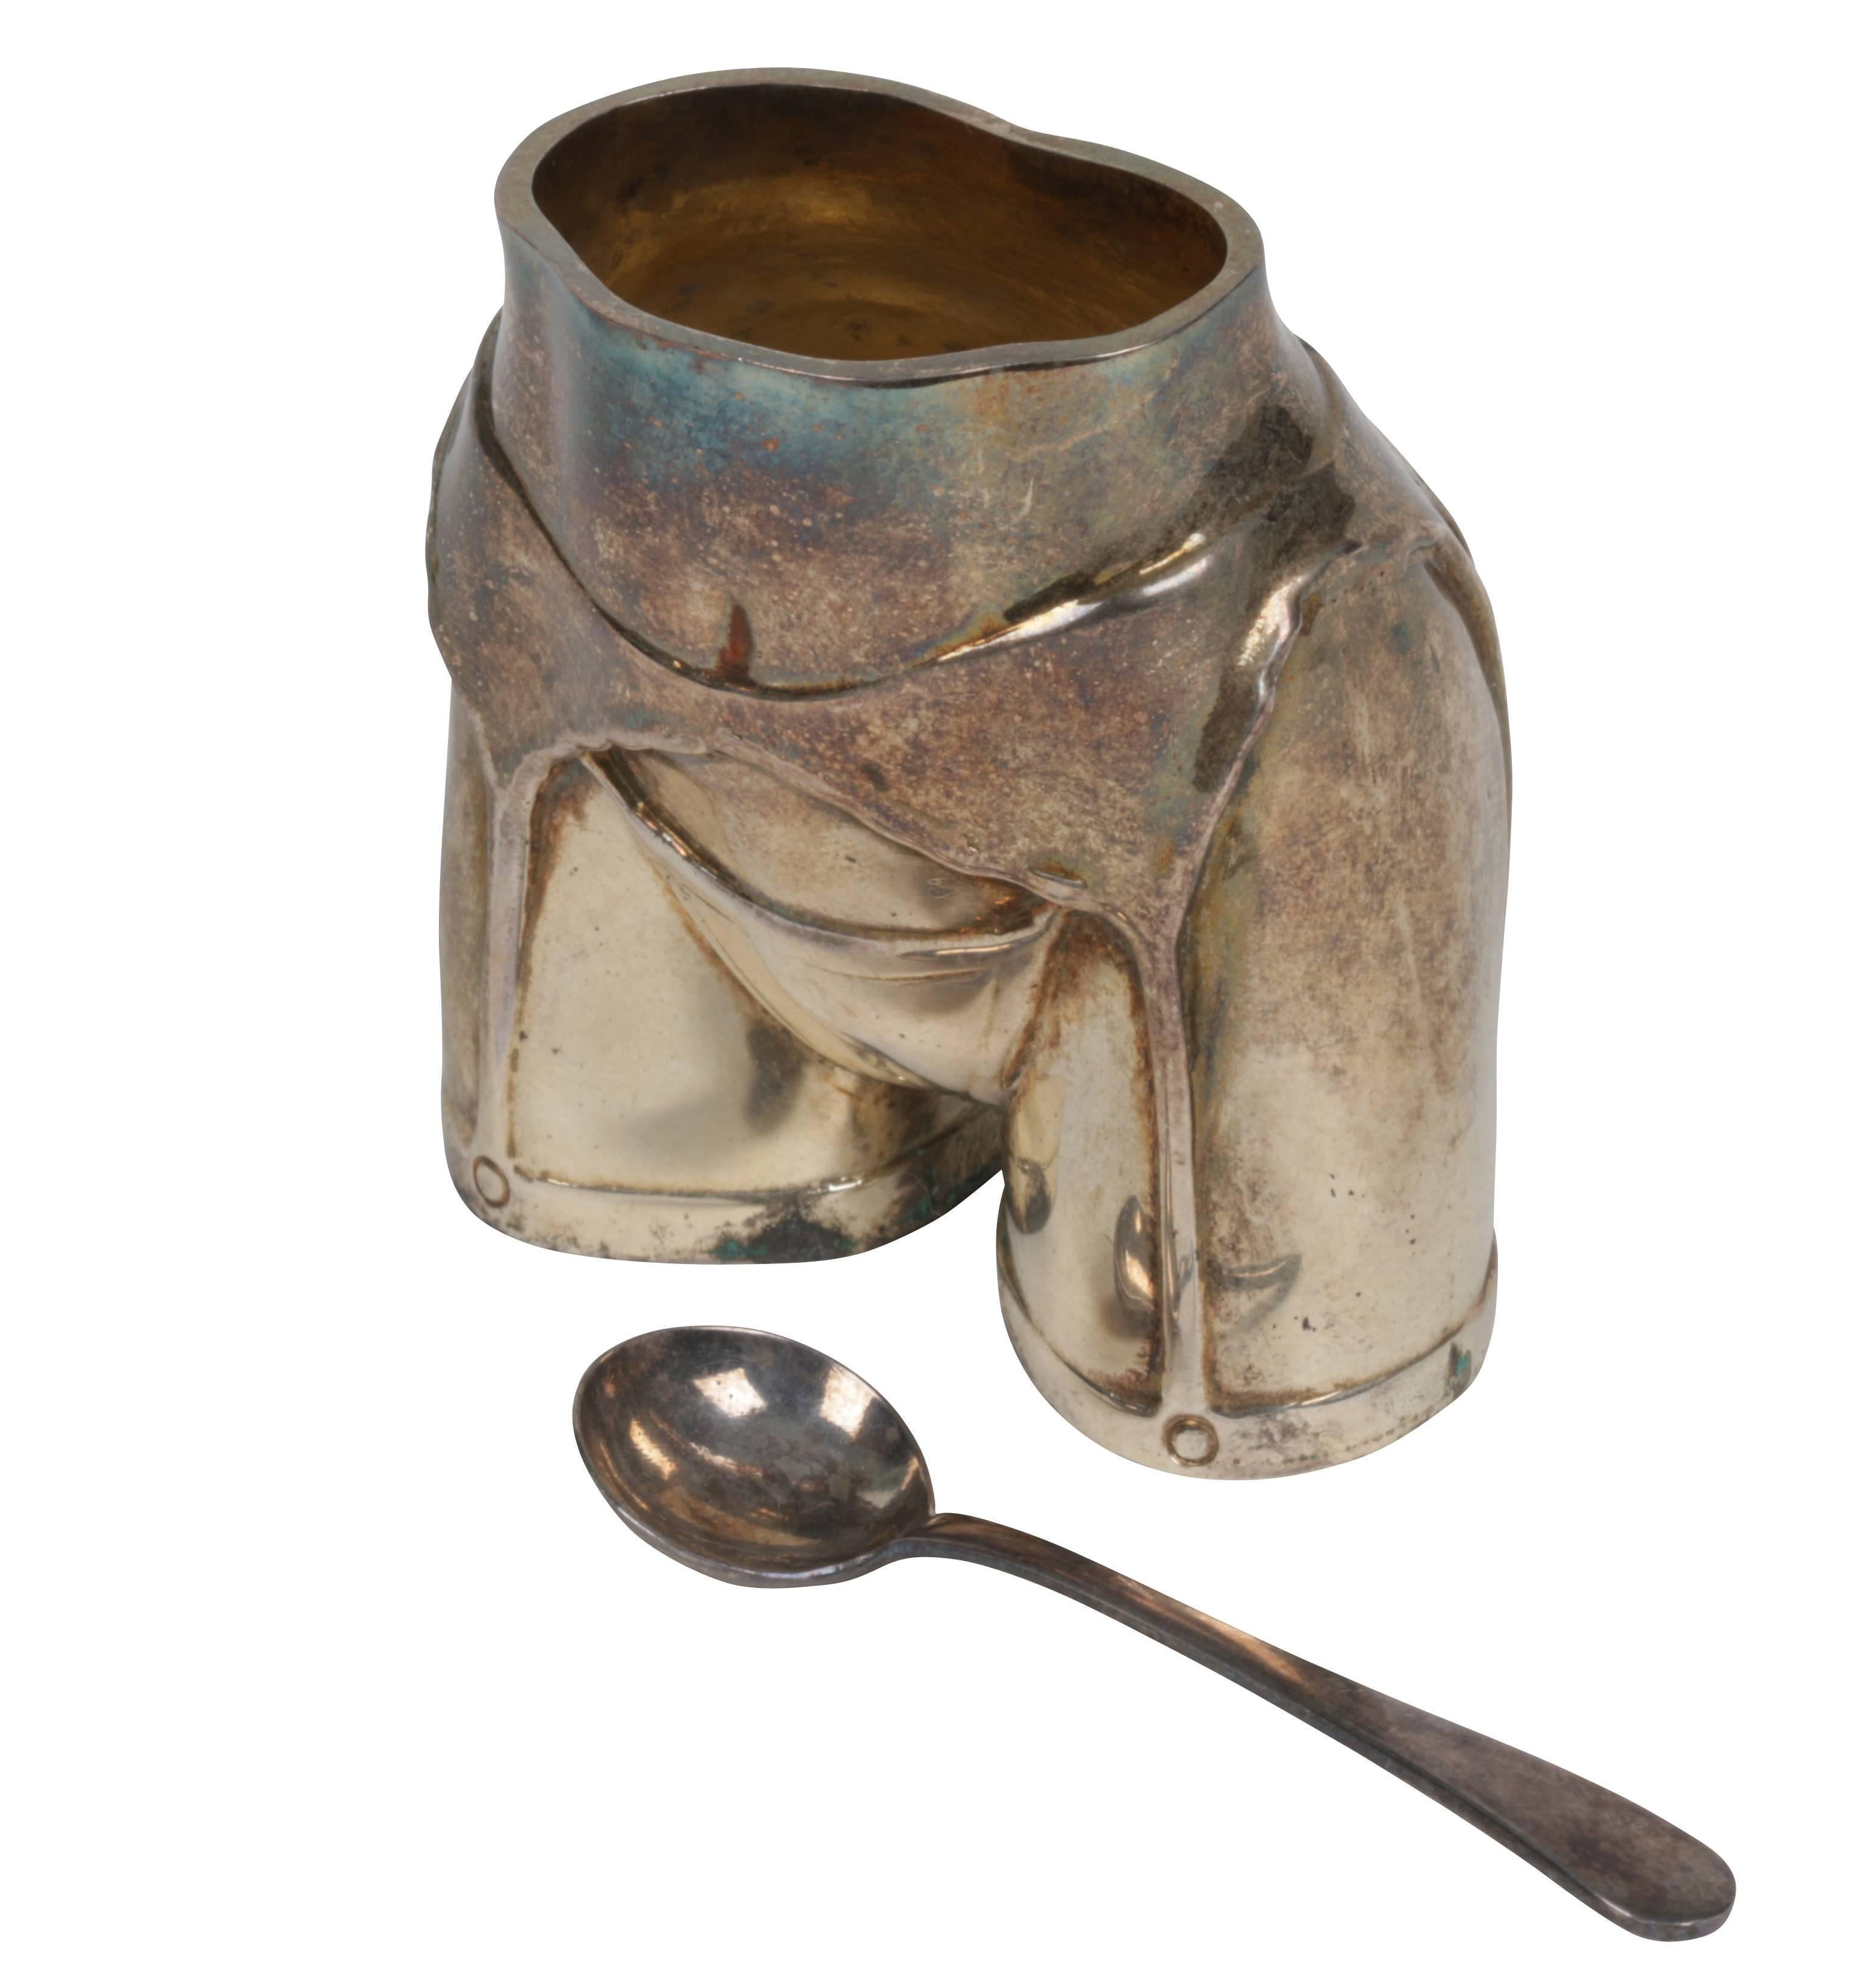 Handcrafted silver plate vessel/toothpick holder/salt cellar with accompanying silver plate spoon. The hallmarked vessel erotically depicts the human buttocks and thighs wearing a garter and lingerie and is stamped Fannell and is hallmarked. The